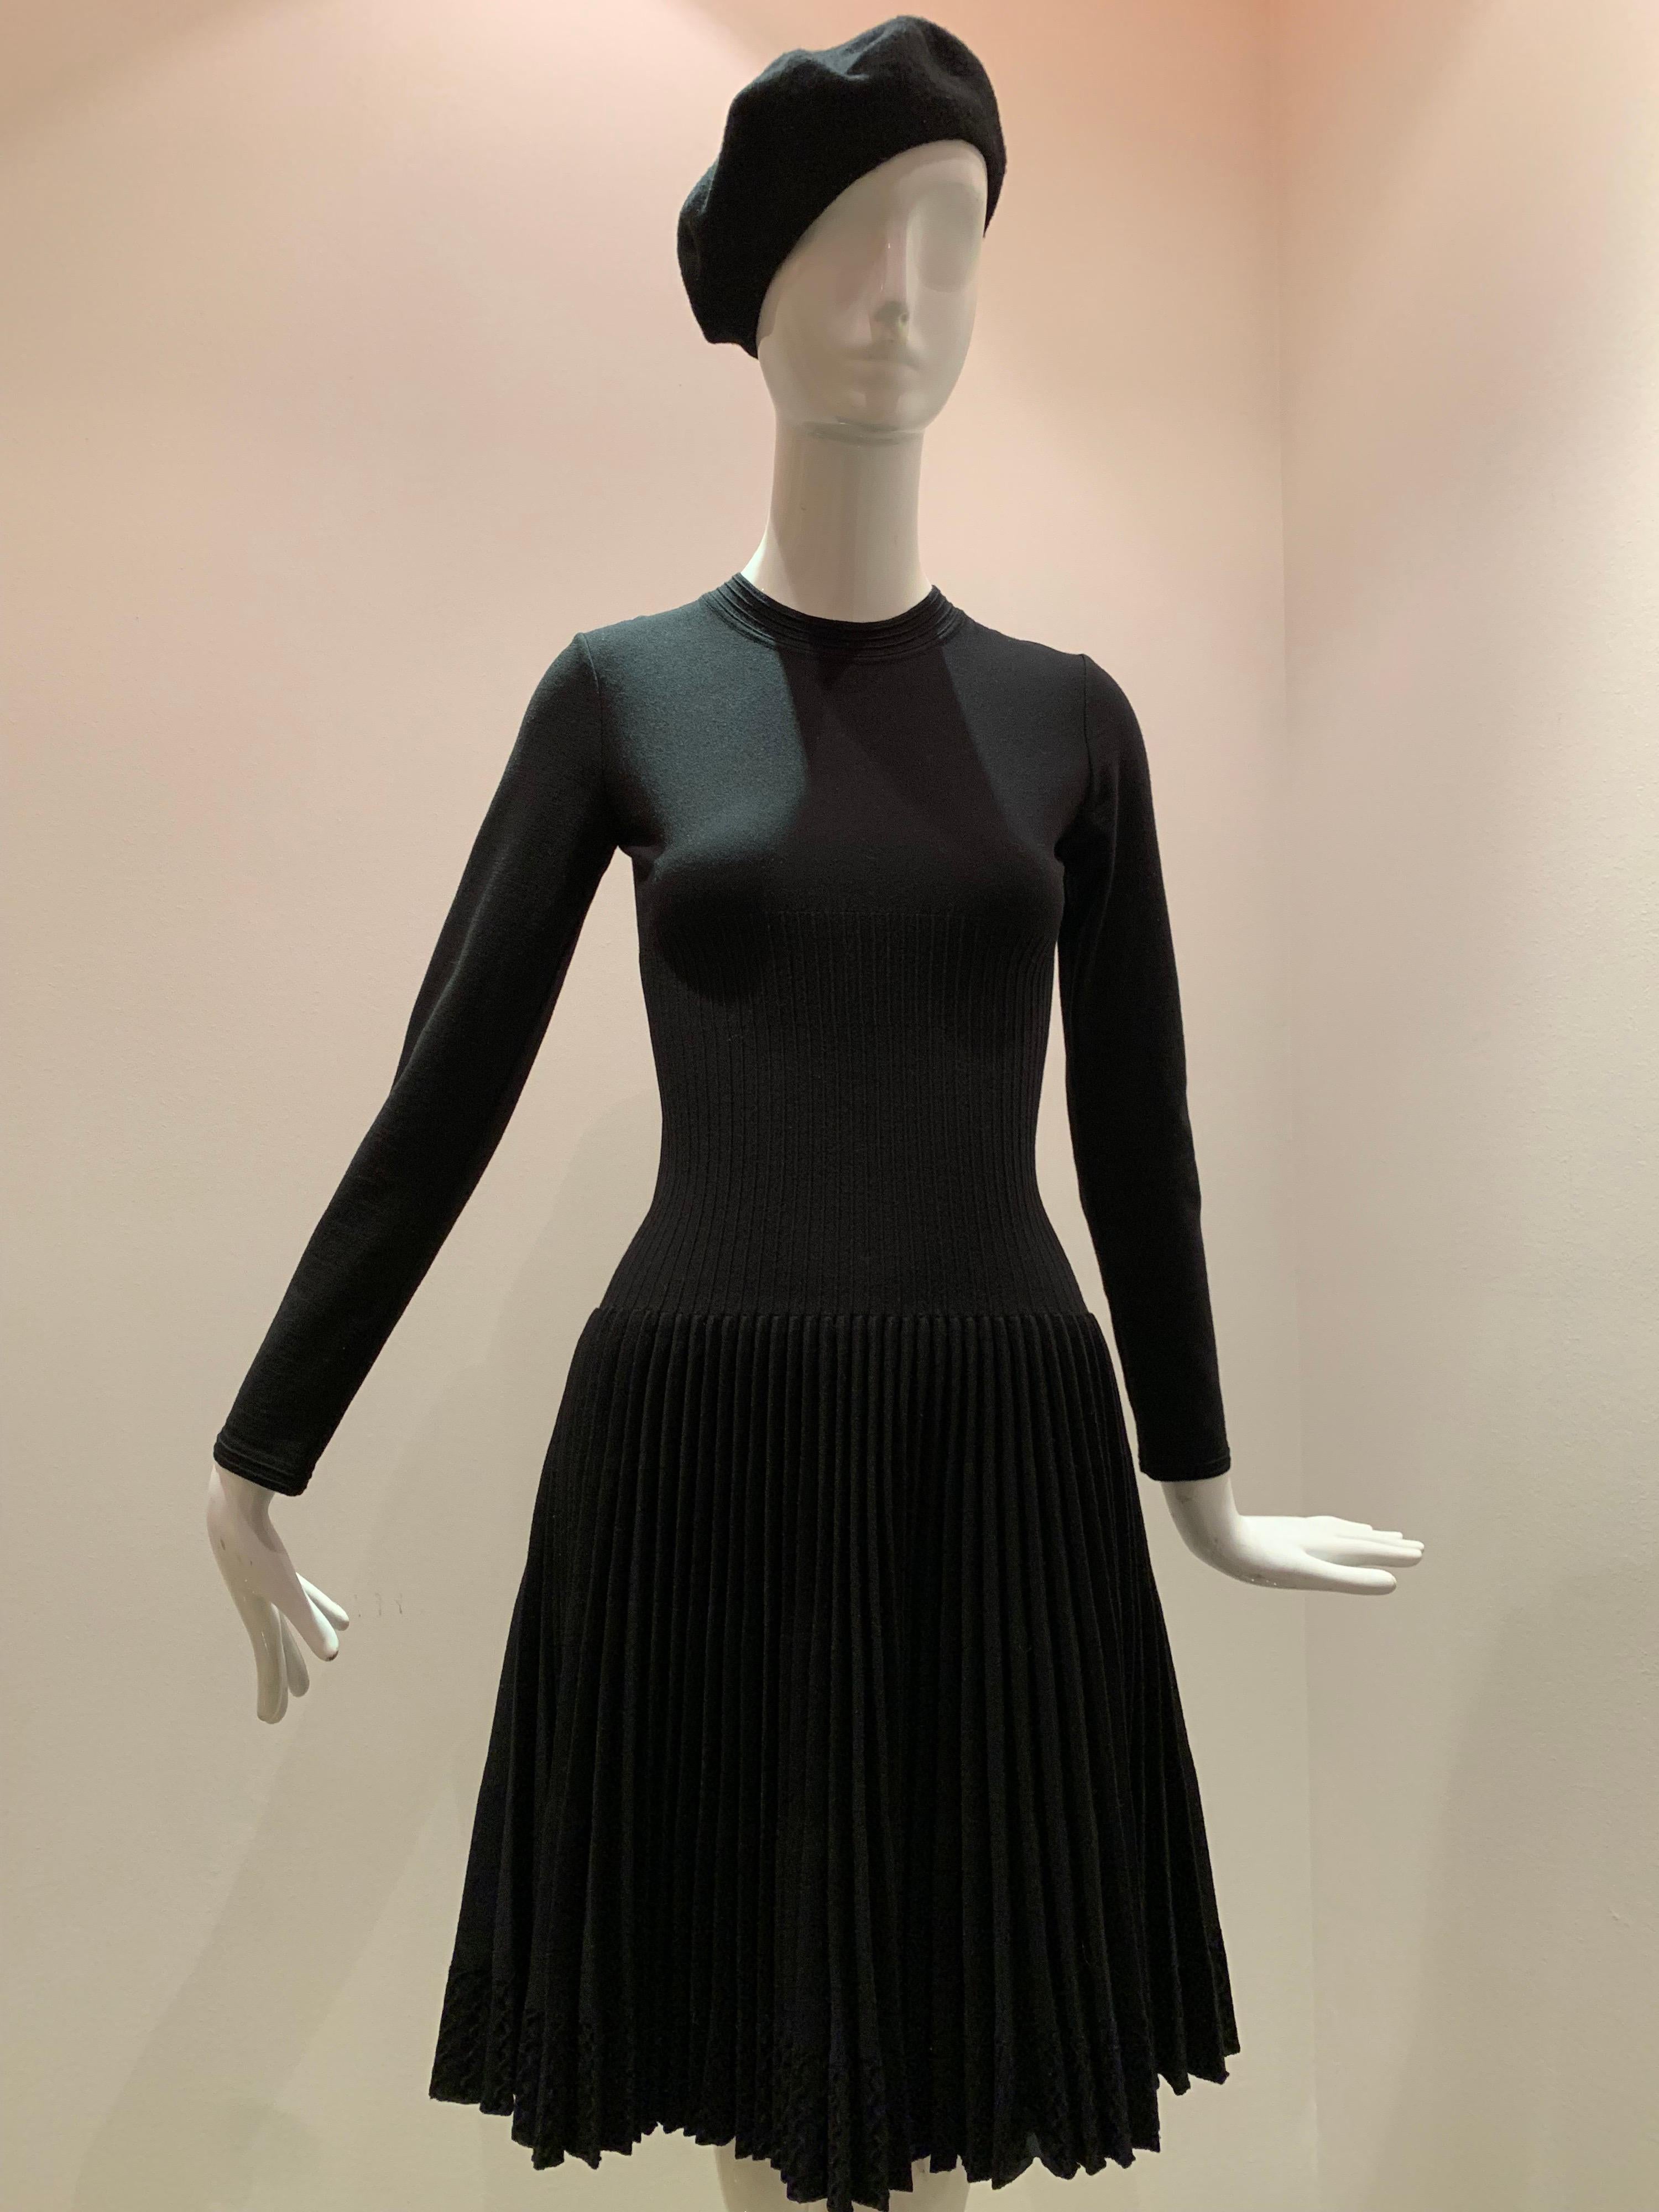 Alaia Black Knit Dress W/ High Neckline Dropped Waist and Pleated Flared Skirt 5